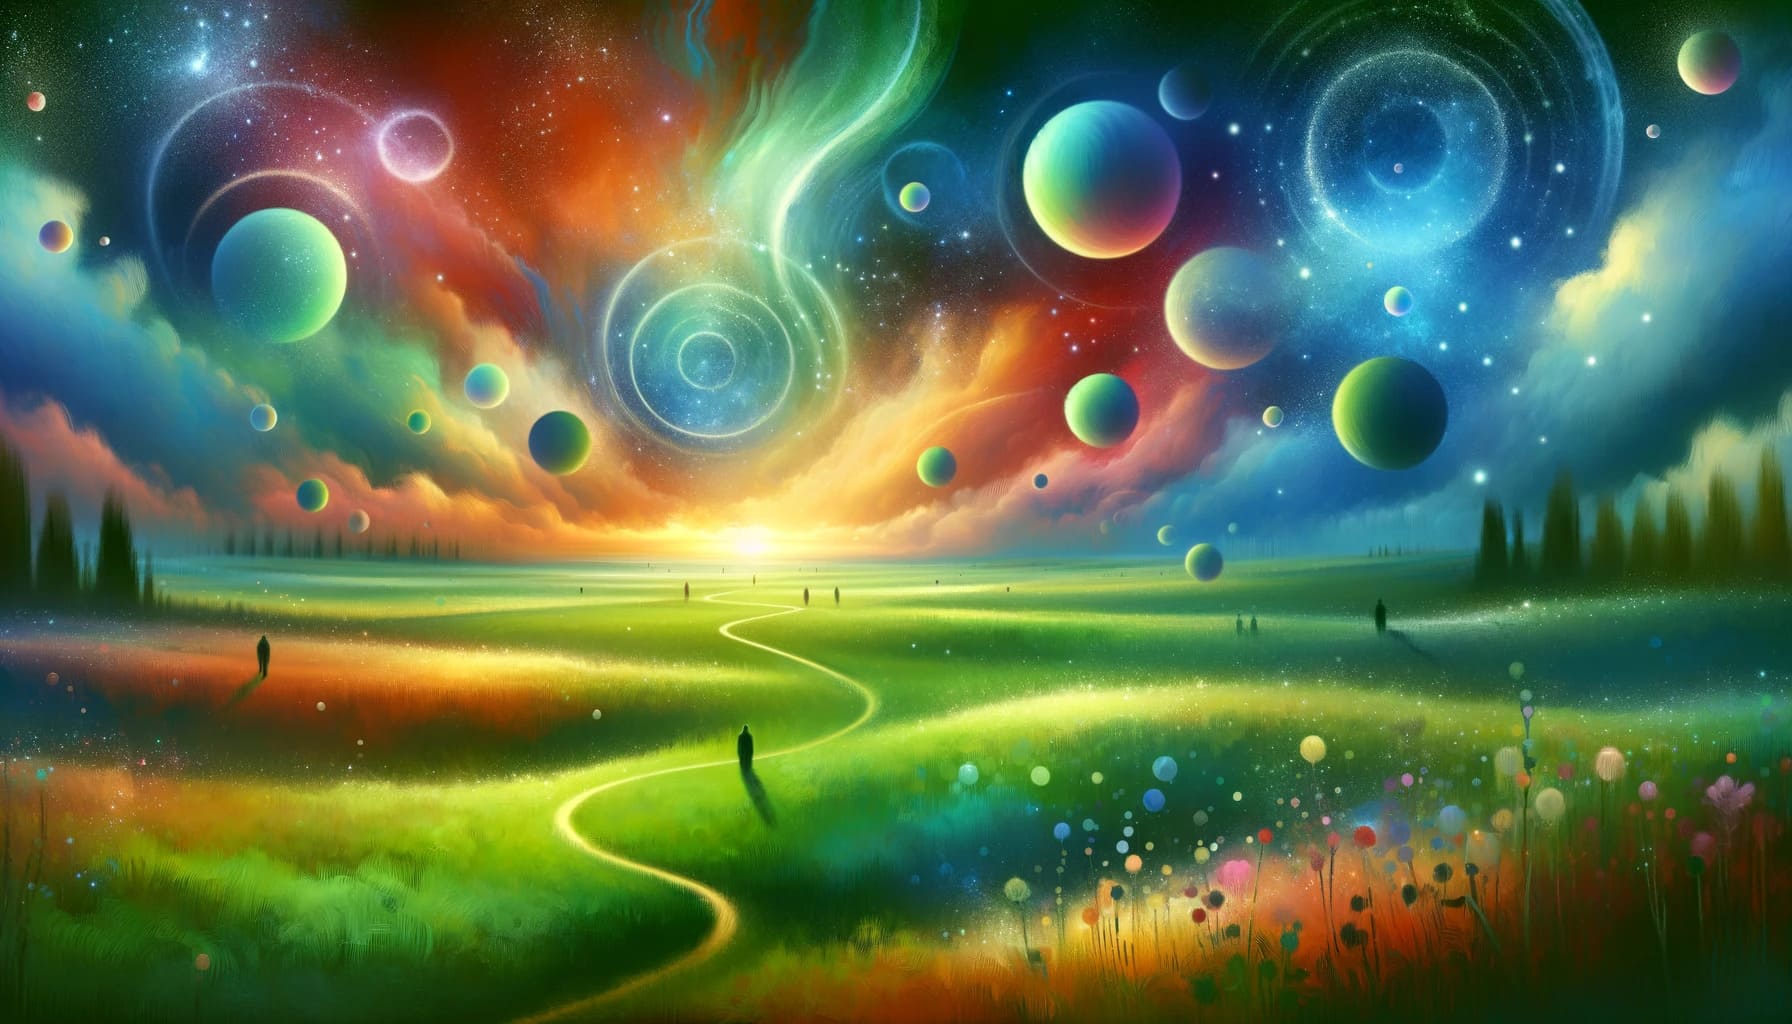 tranquil and ethereal dream landscape featuring a lush green meadow under a vibrant colorful sky with symbolic elements like floating orbs a win